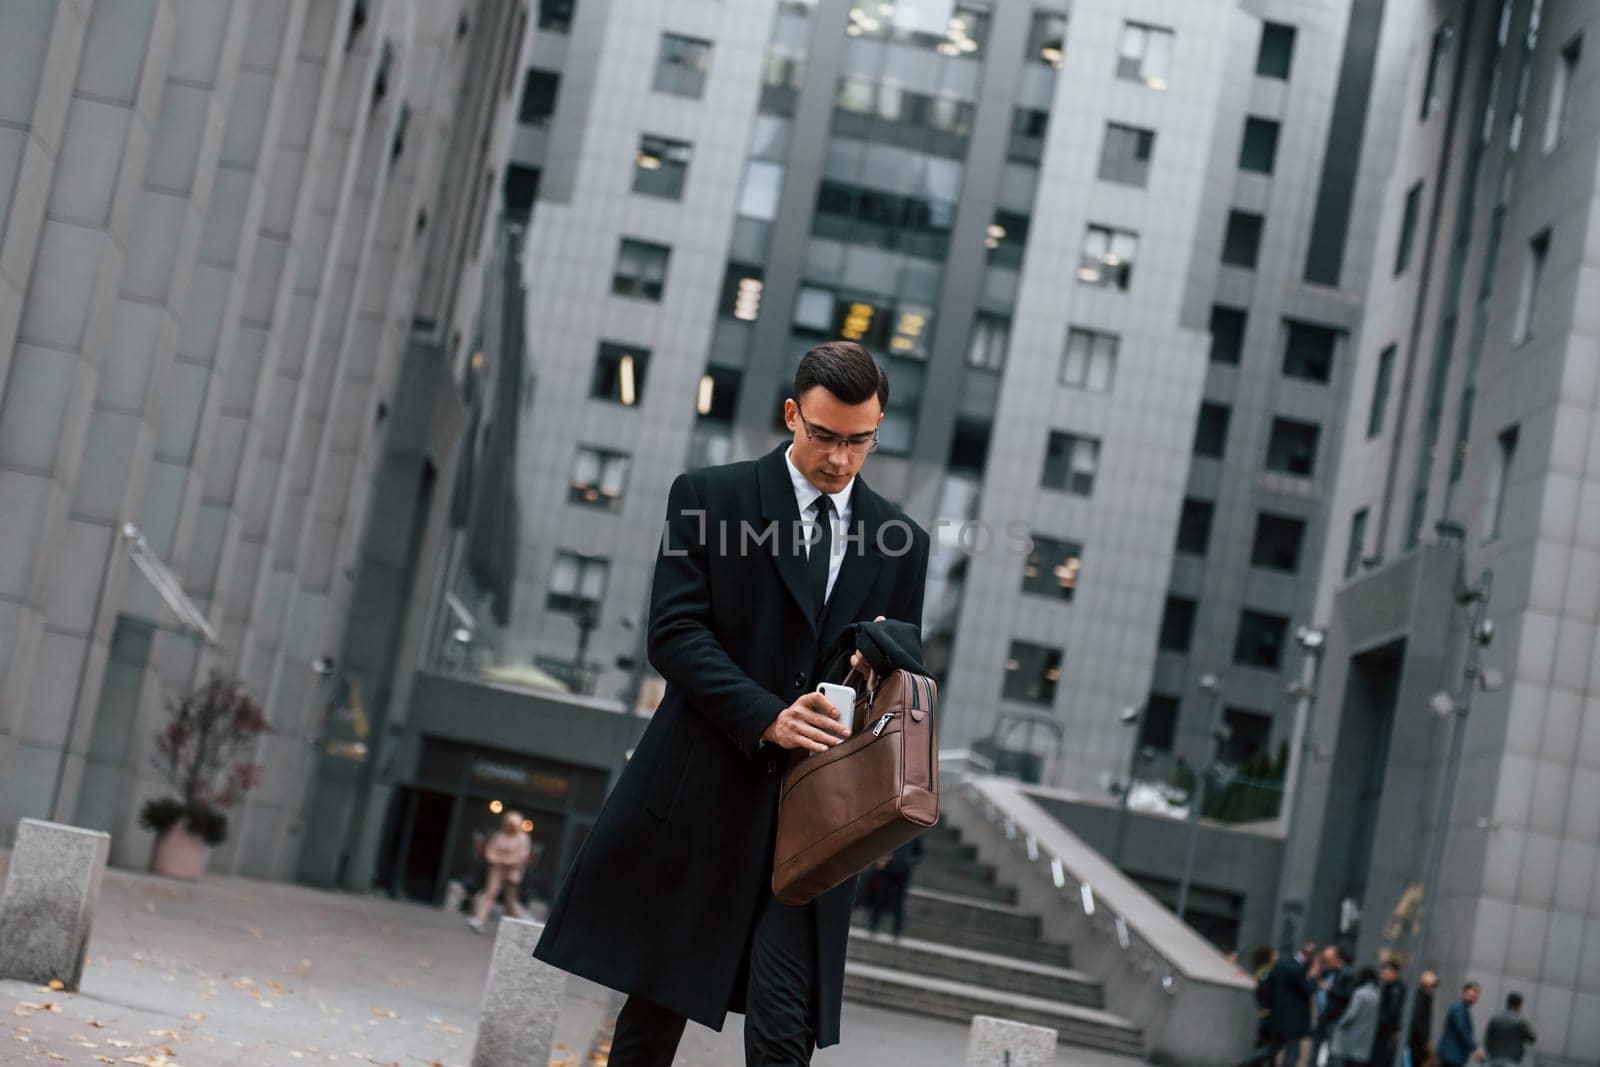 In formal clothes. Businessman in black suit and tie is outdoors in the city.